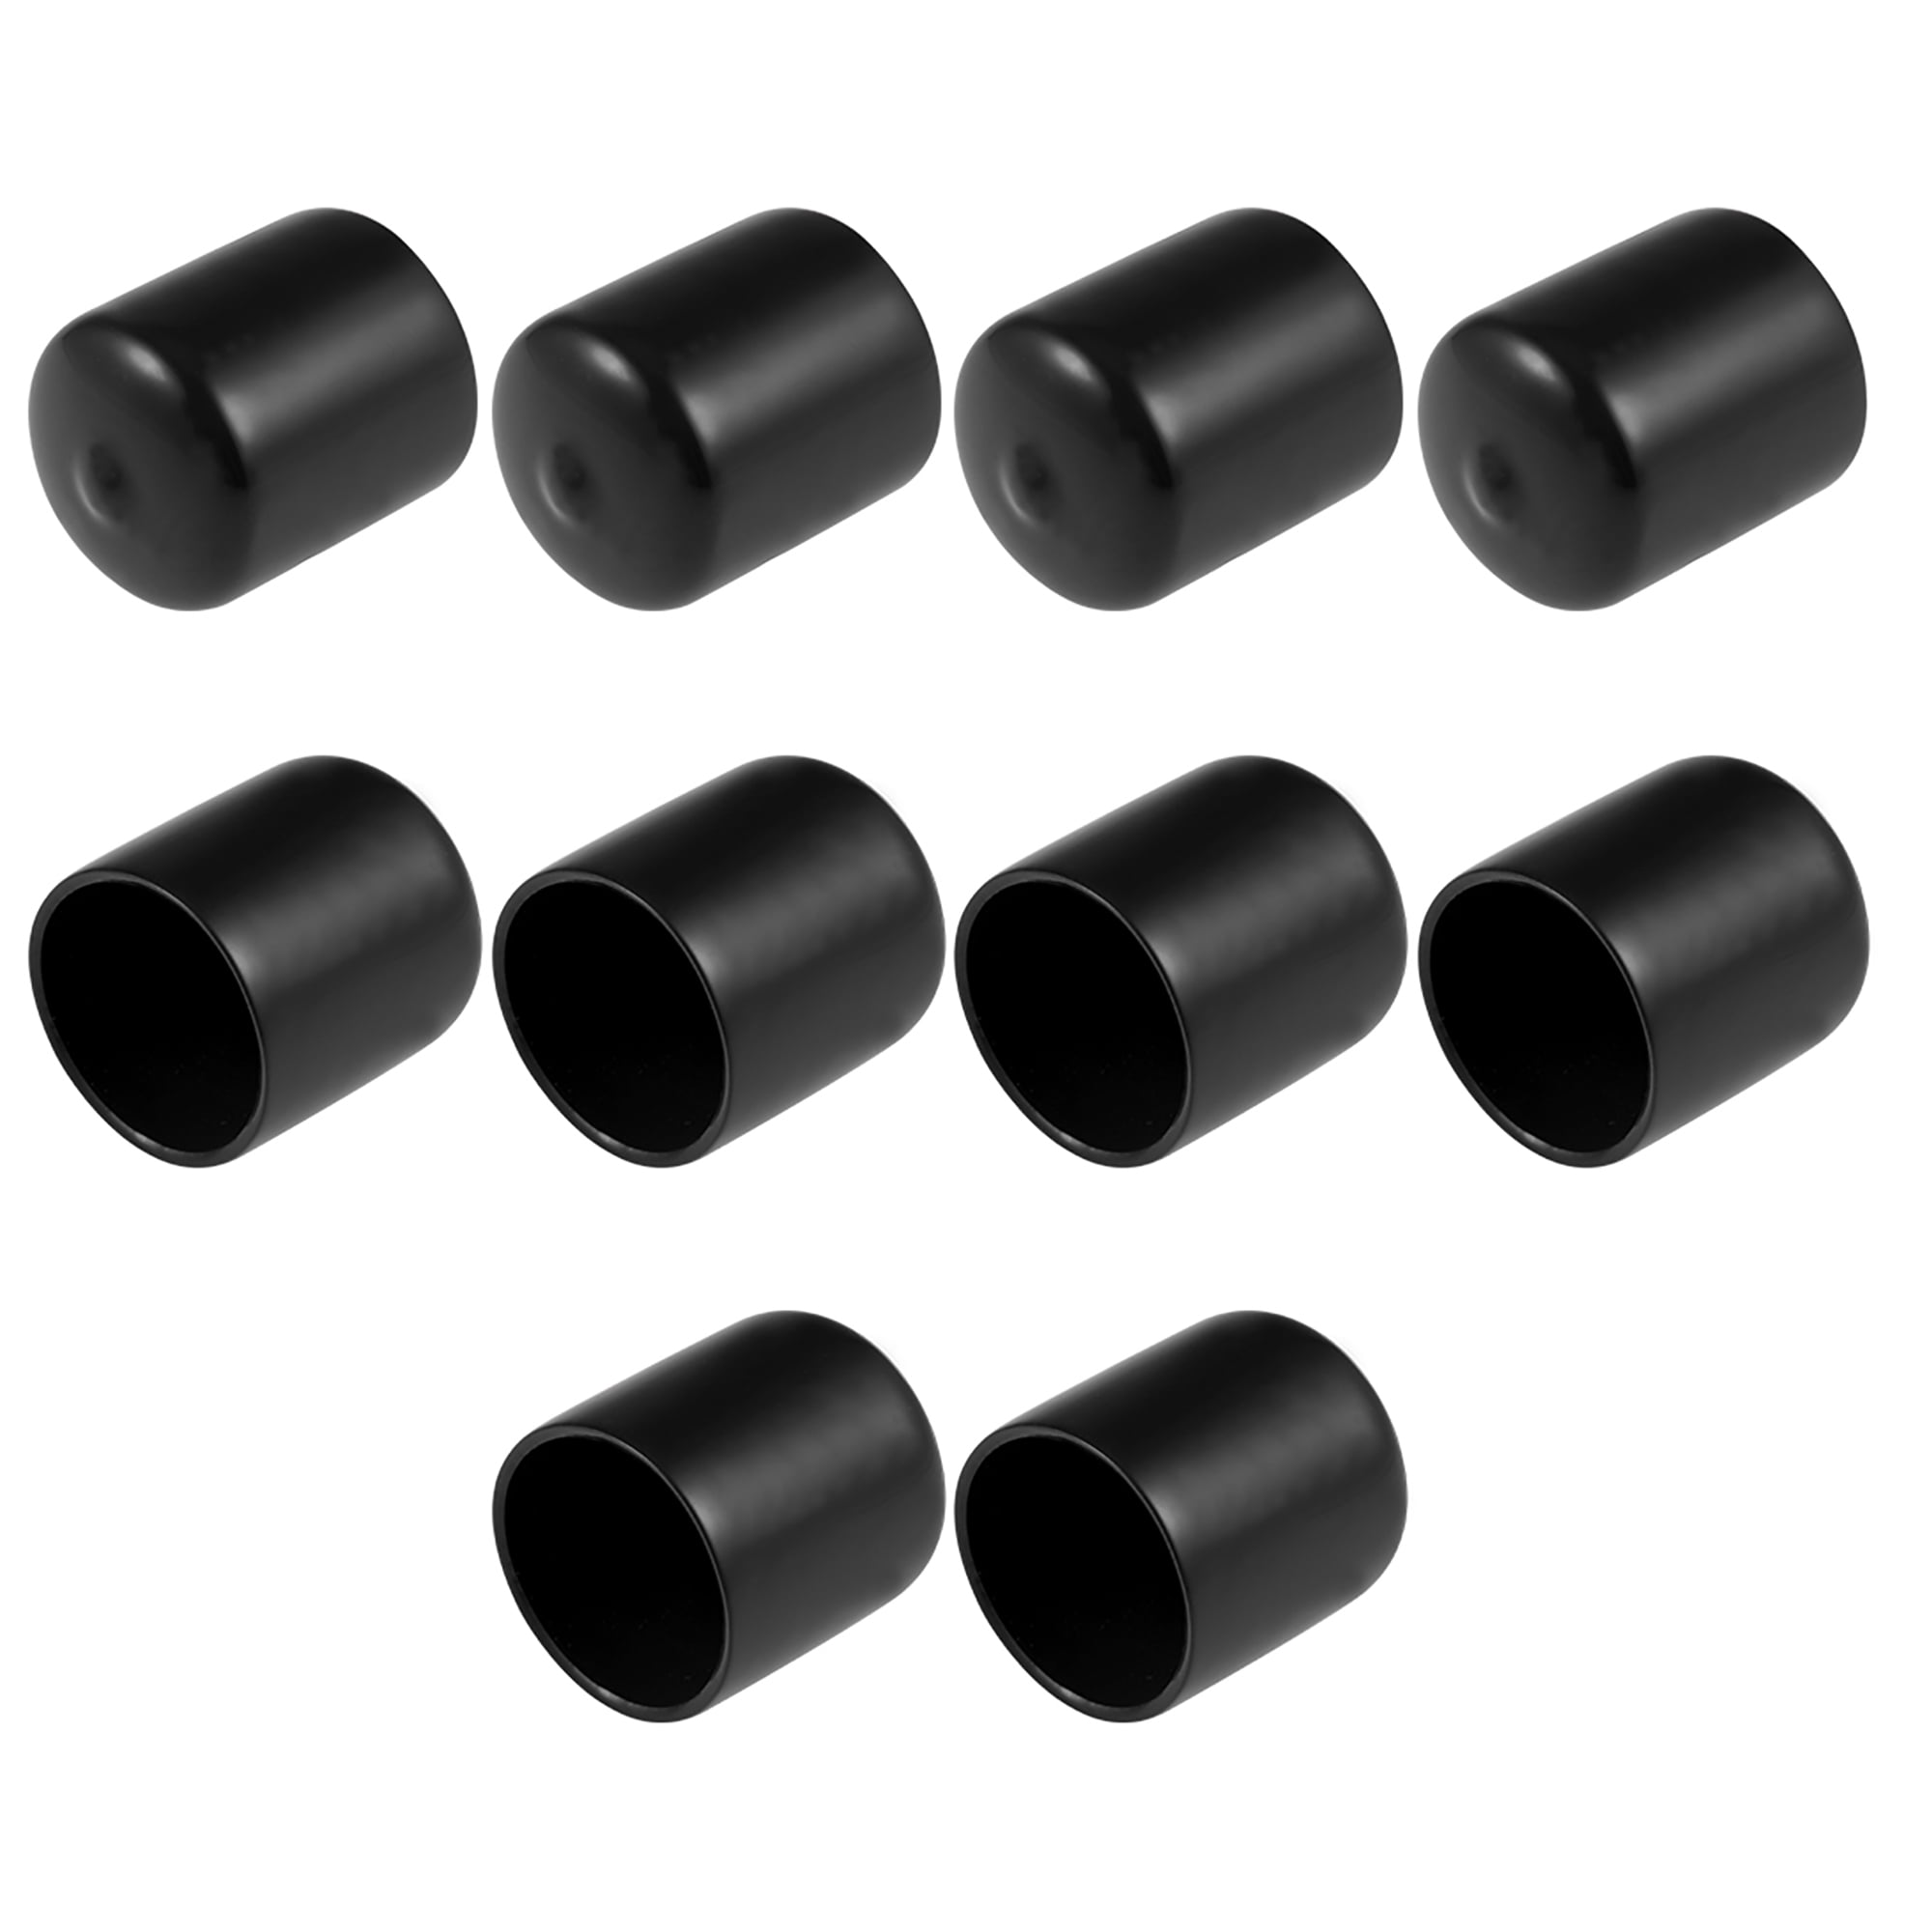 1.3-15.5mm Black End Caps End Covers For Tubes Rods & Threads Rubber Plastic 